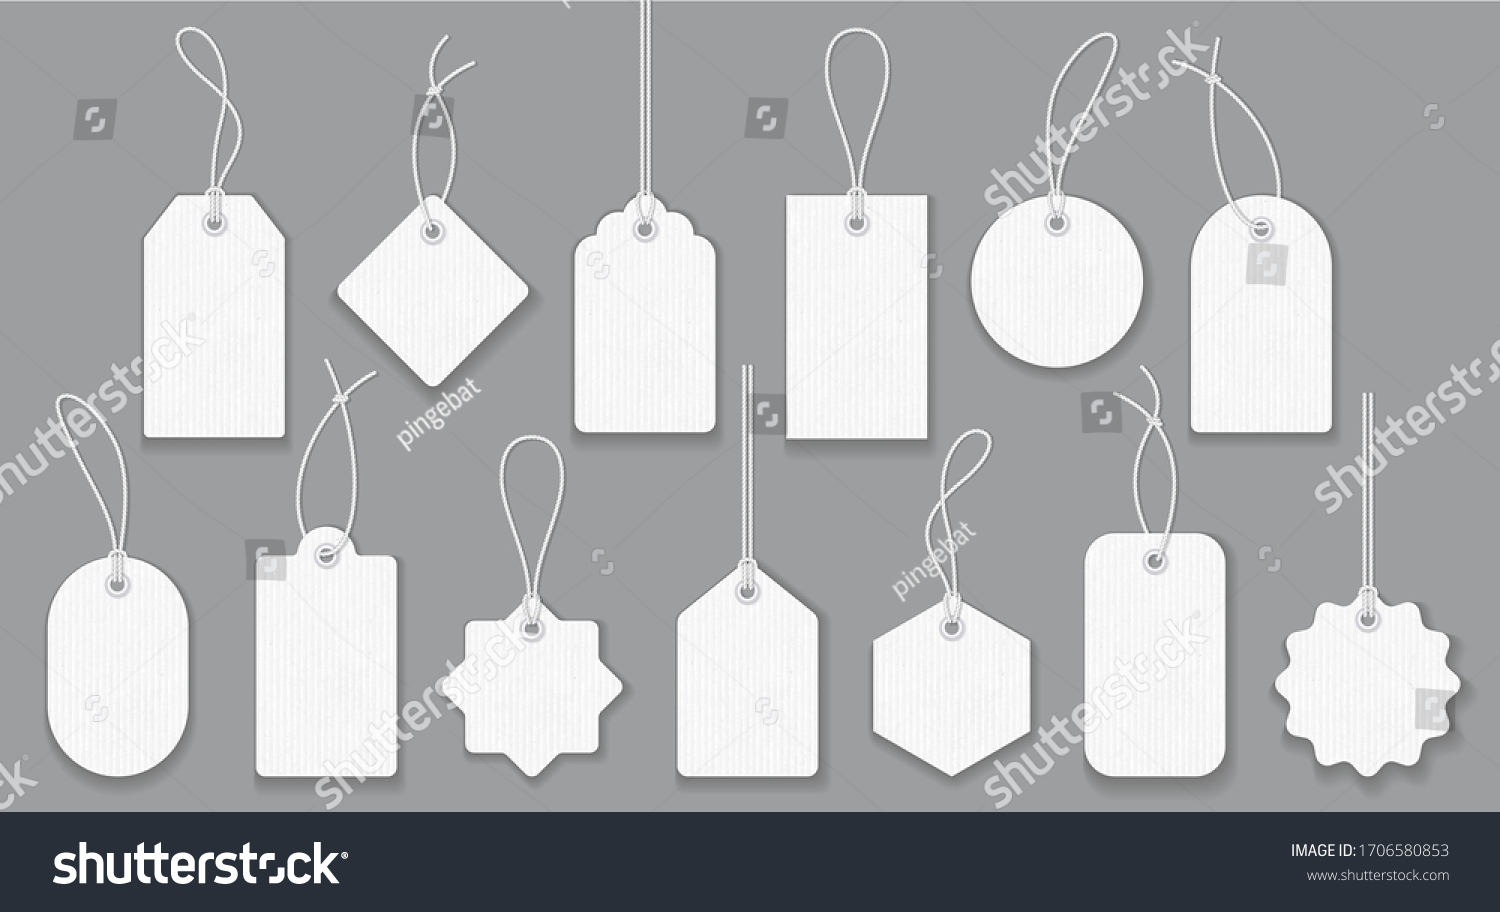 Blank white paper price tags or gift tags in different shapes. Set of labels with cord. #1706580853